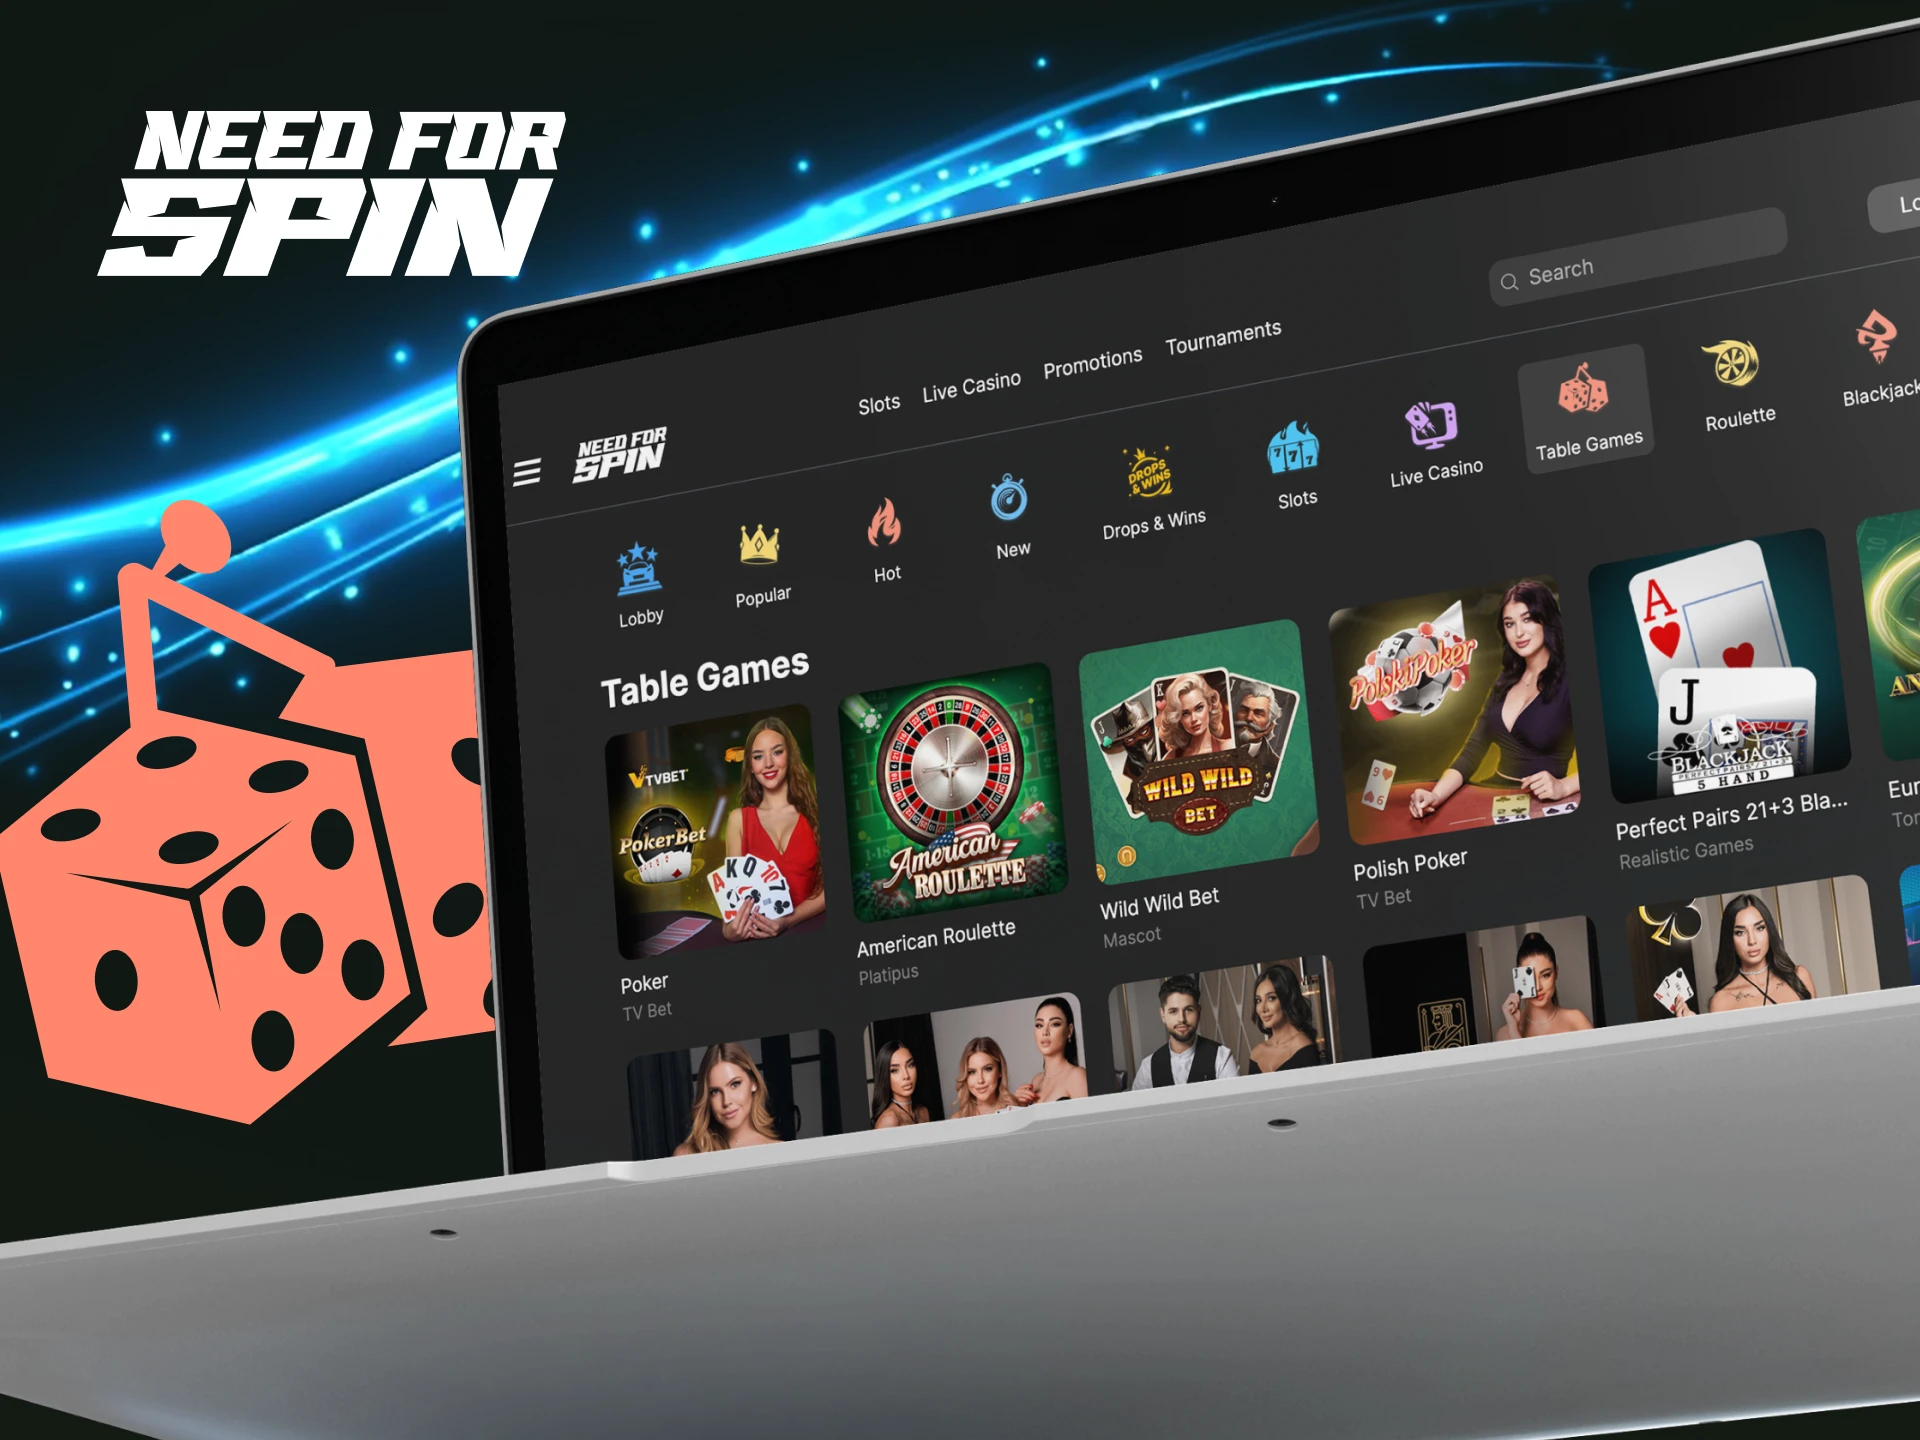 What table games are available on the Need For Spin online casino website.